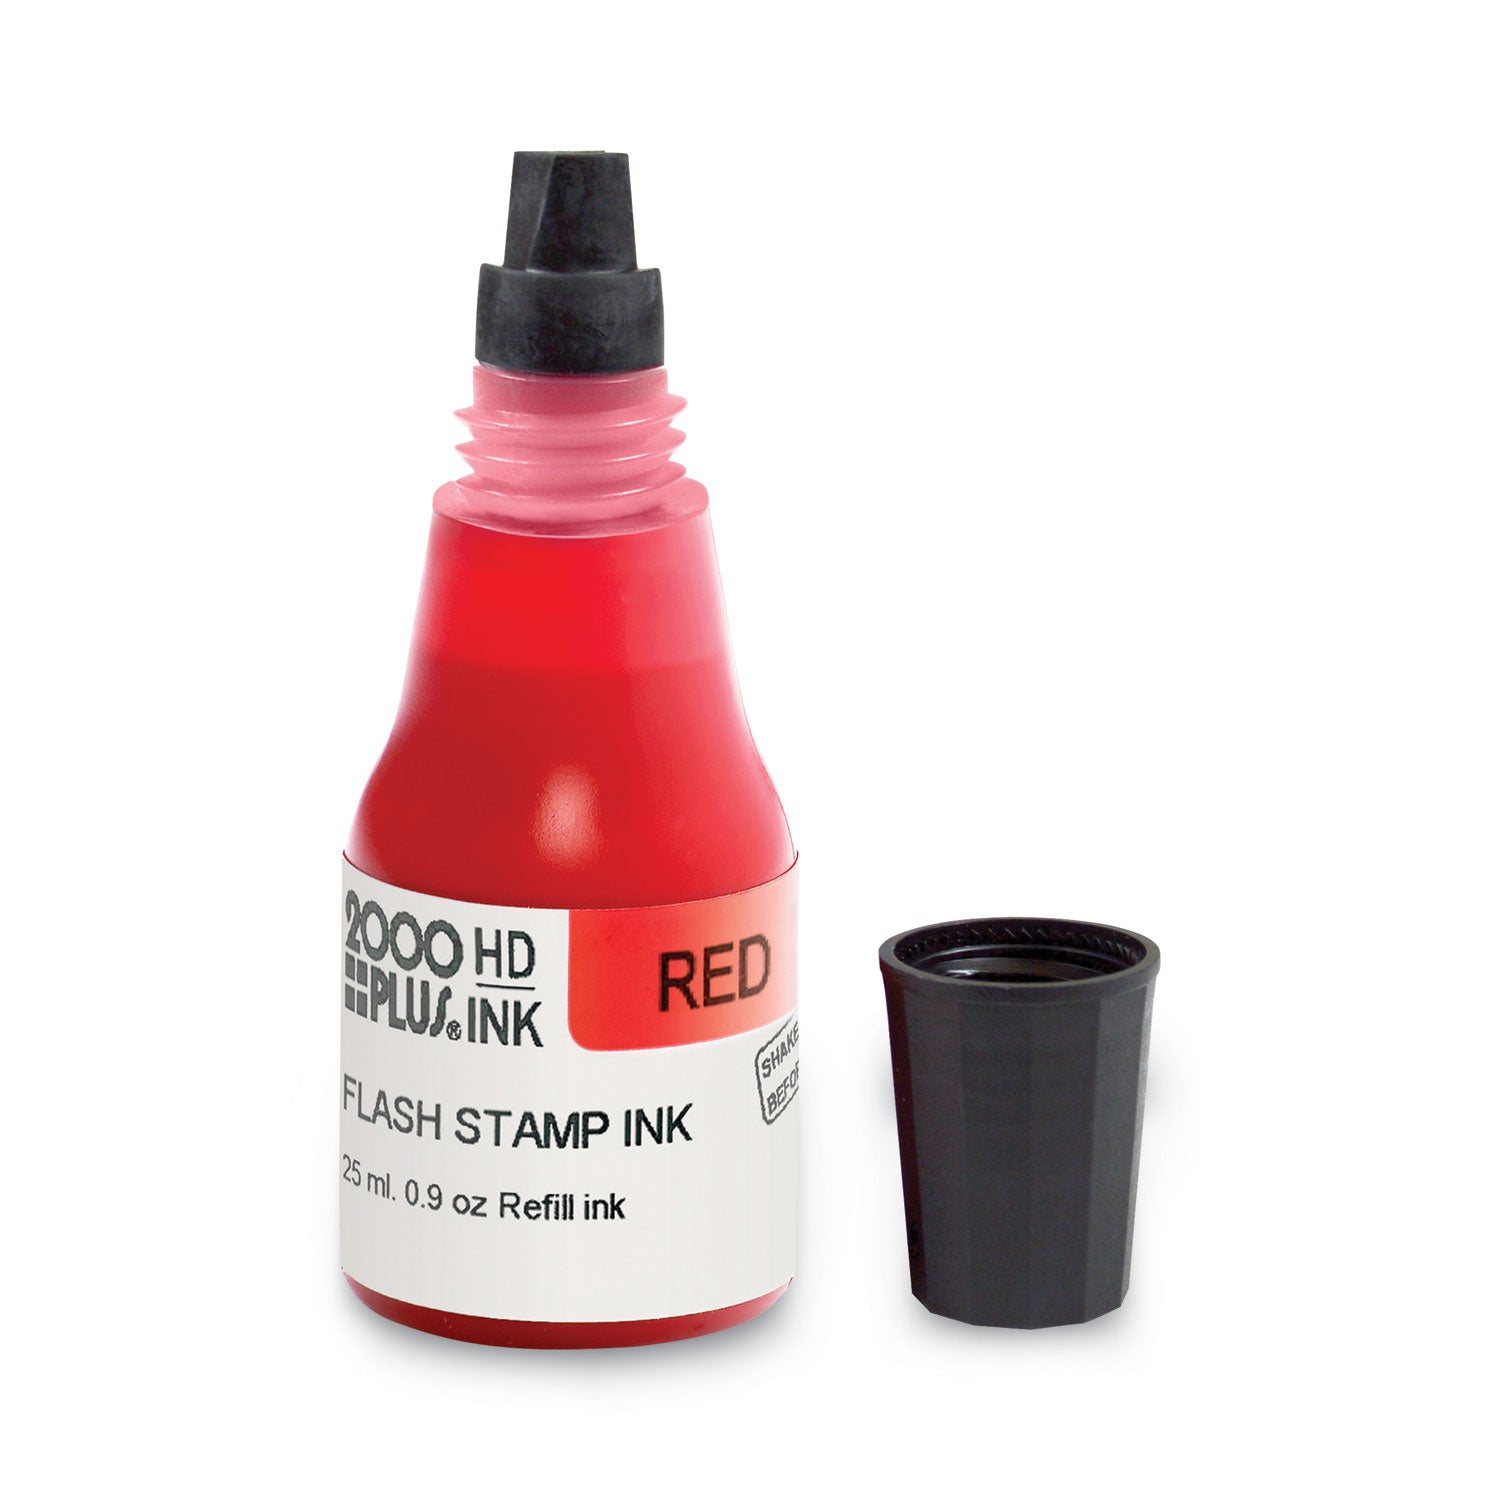 pre-ink-high-definition-refill-ink-red-09-oz-bottle-red_cos033958 - 2